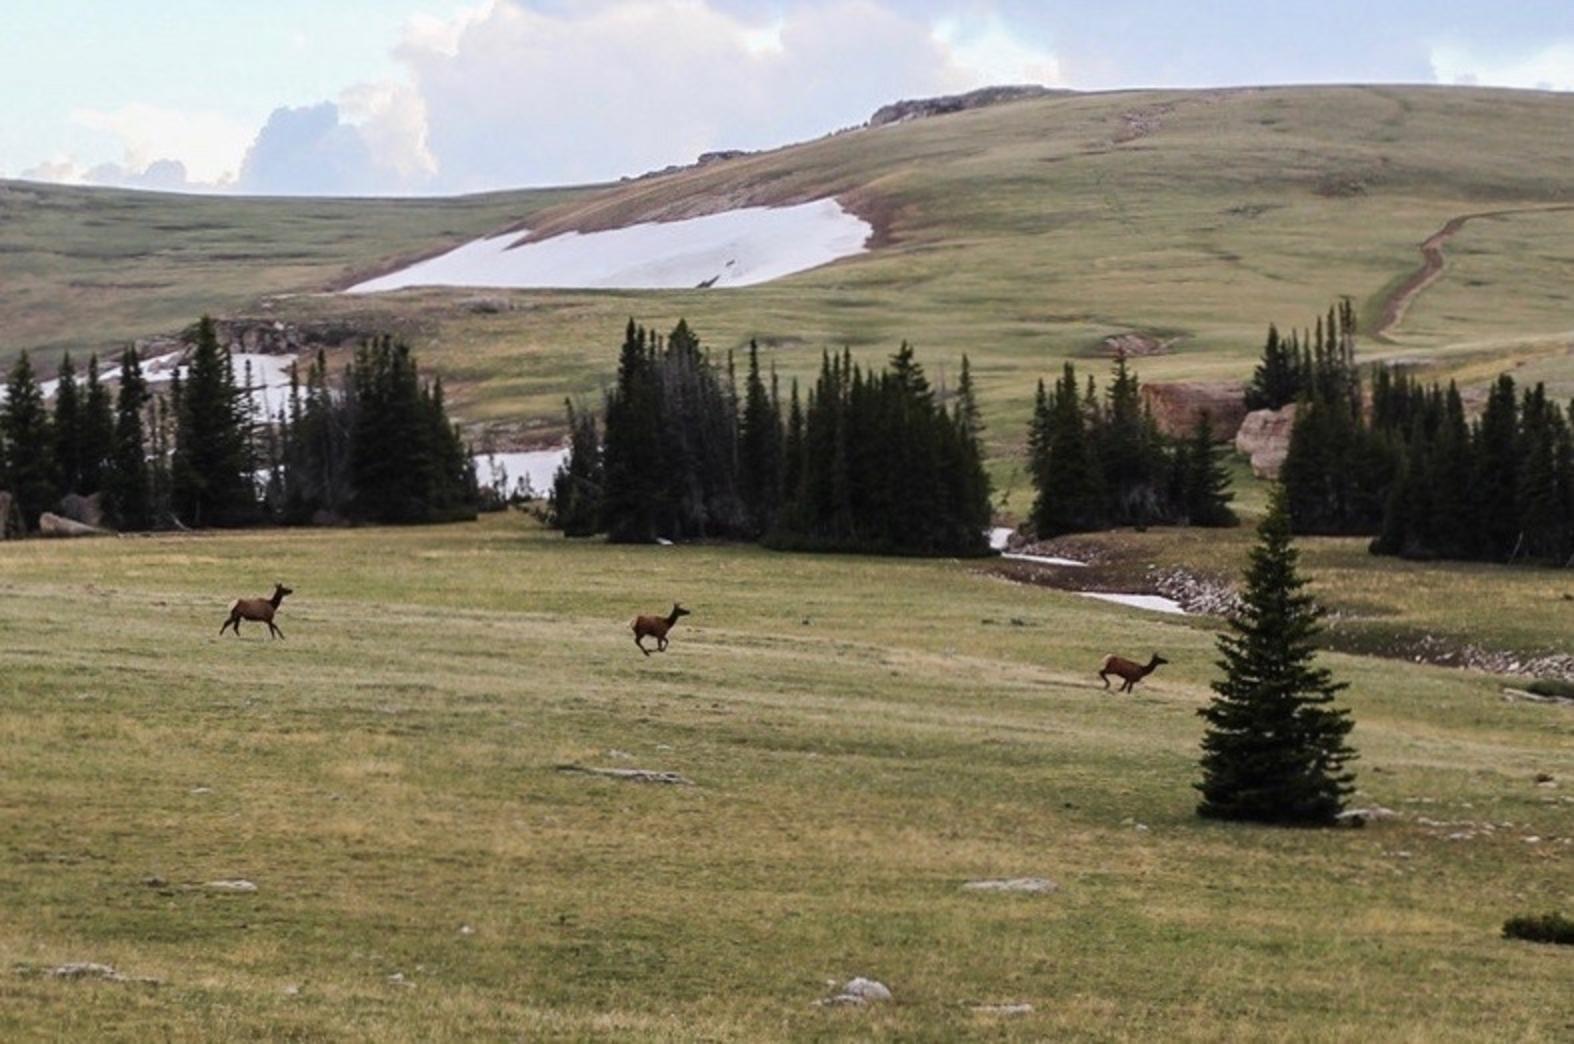 Elk migrate through Wyoming's Bighorn Mountains. While the public lands high country provides crucial range for wapiti in three seasons, lower-elevation private land functions as crucial winter range and as passageways between the mountains. The epic wildlife migrations of Greater Yellowstone, like those in the Bighorns, cannot endure without the goodwill of private landowners whose contributions need to be recognized and rewarded.  Photo courtesy Gregory Nickerson/Wyoming Migration Initiative/University of Wyoming